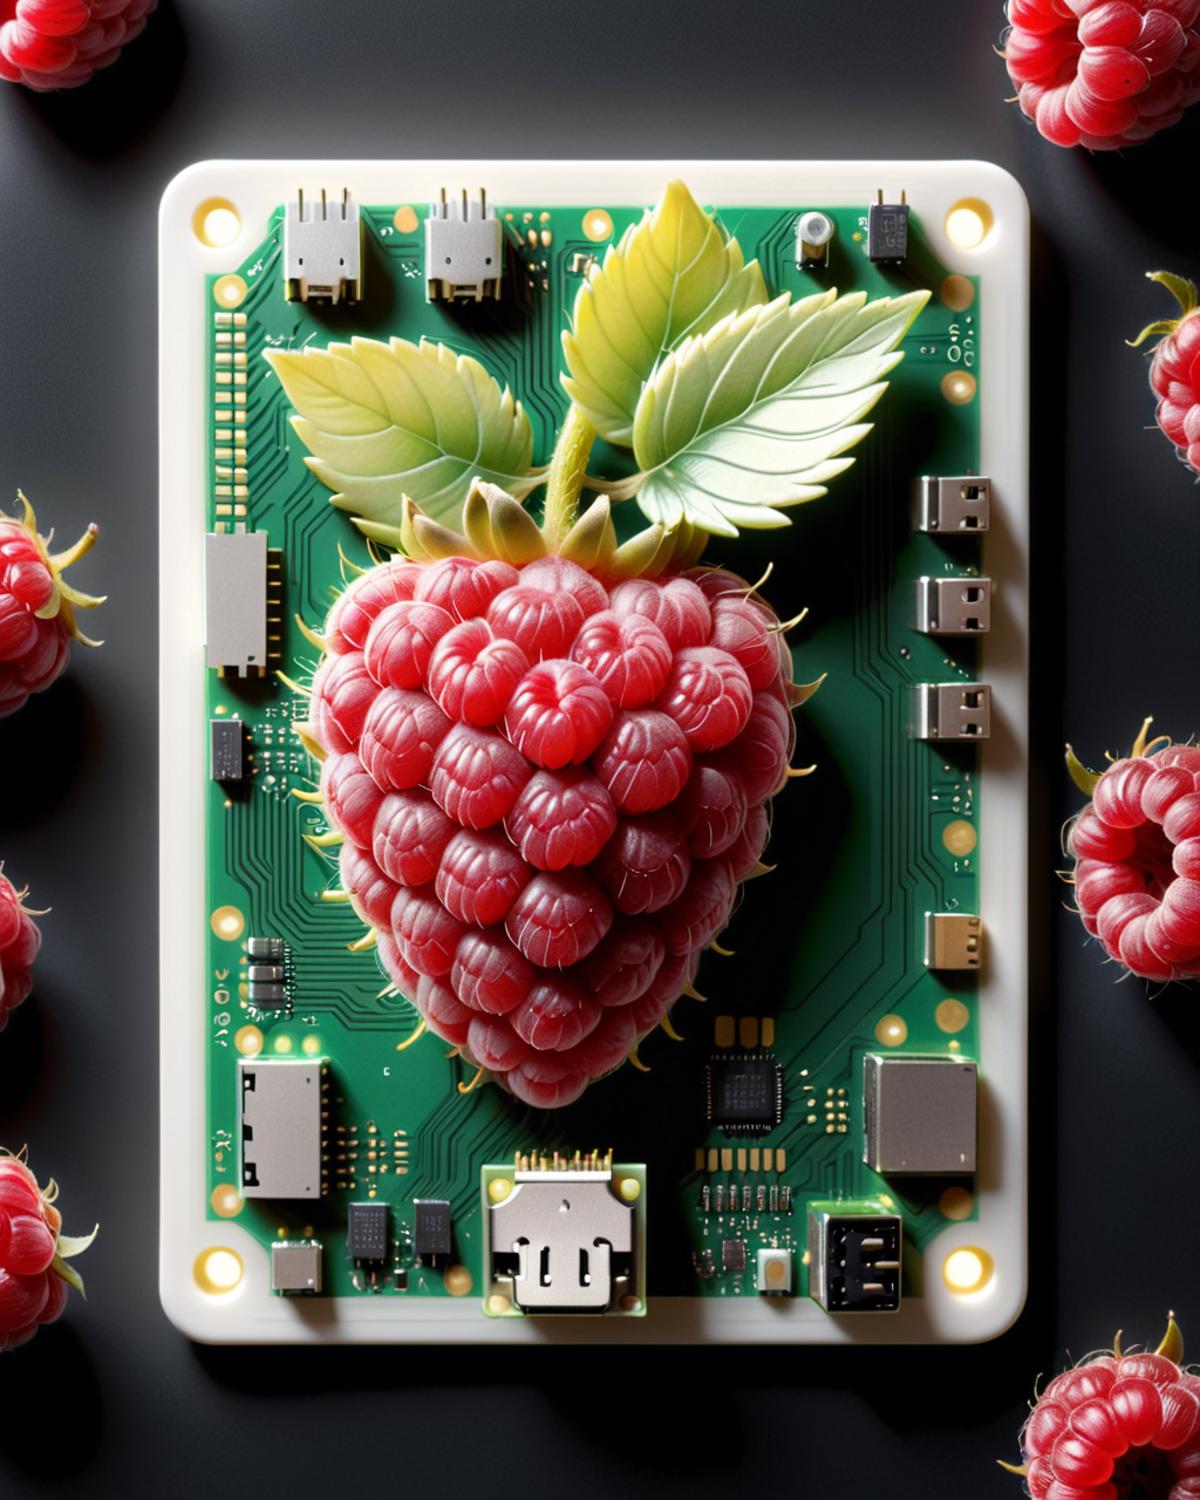 A close-up of a green computer board with a raspberry on top.